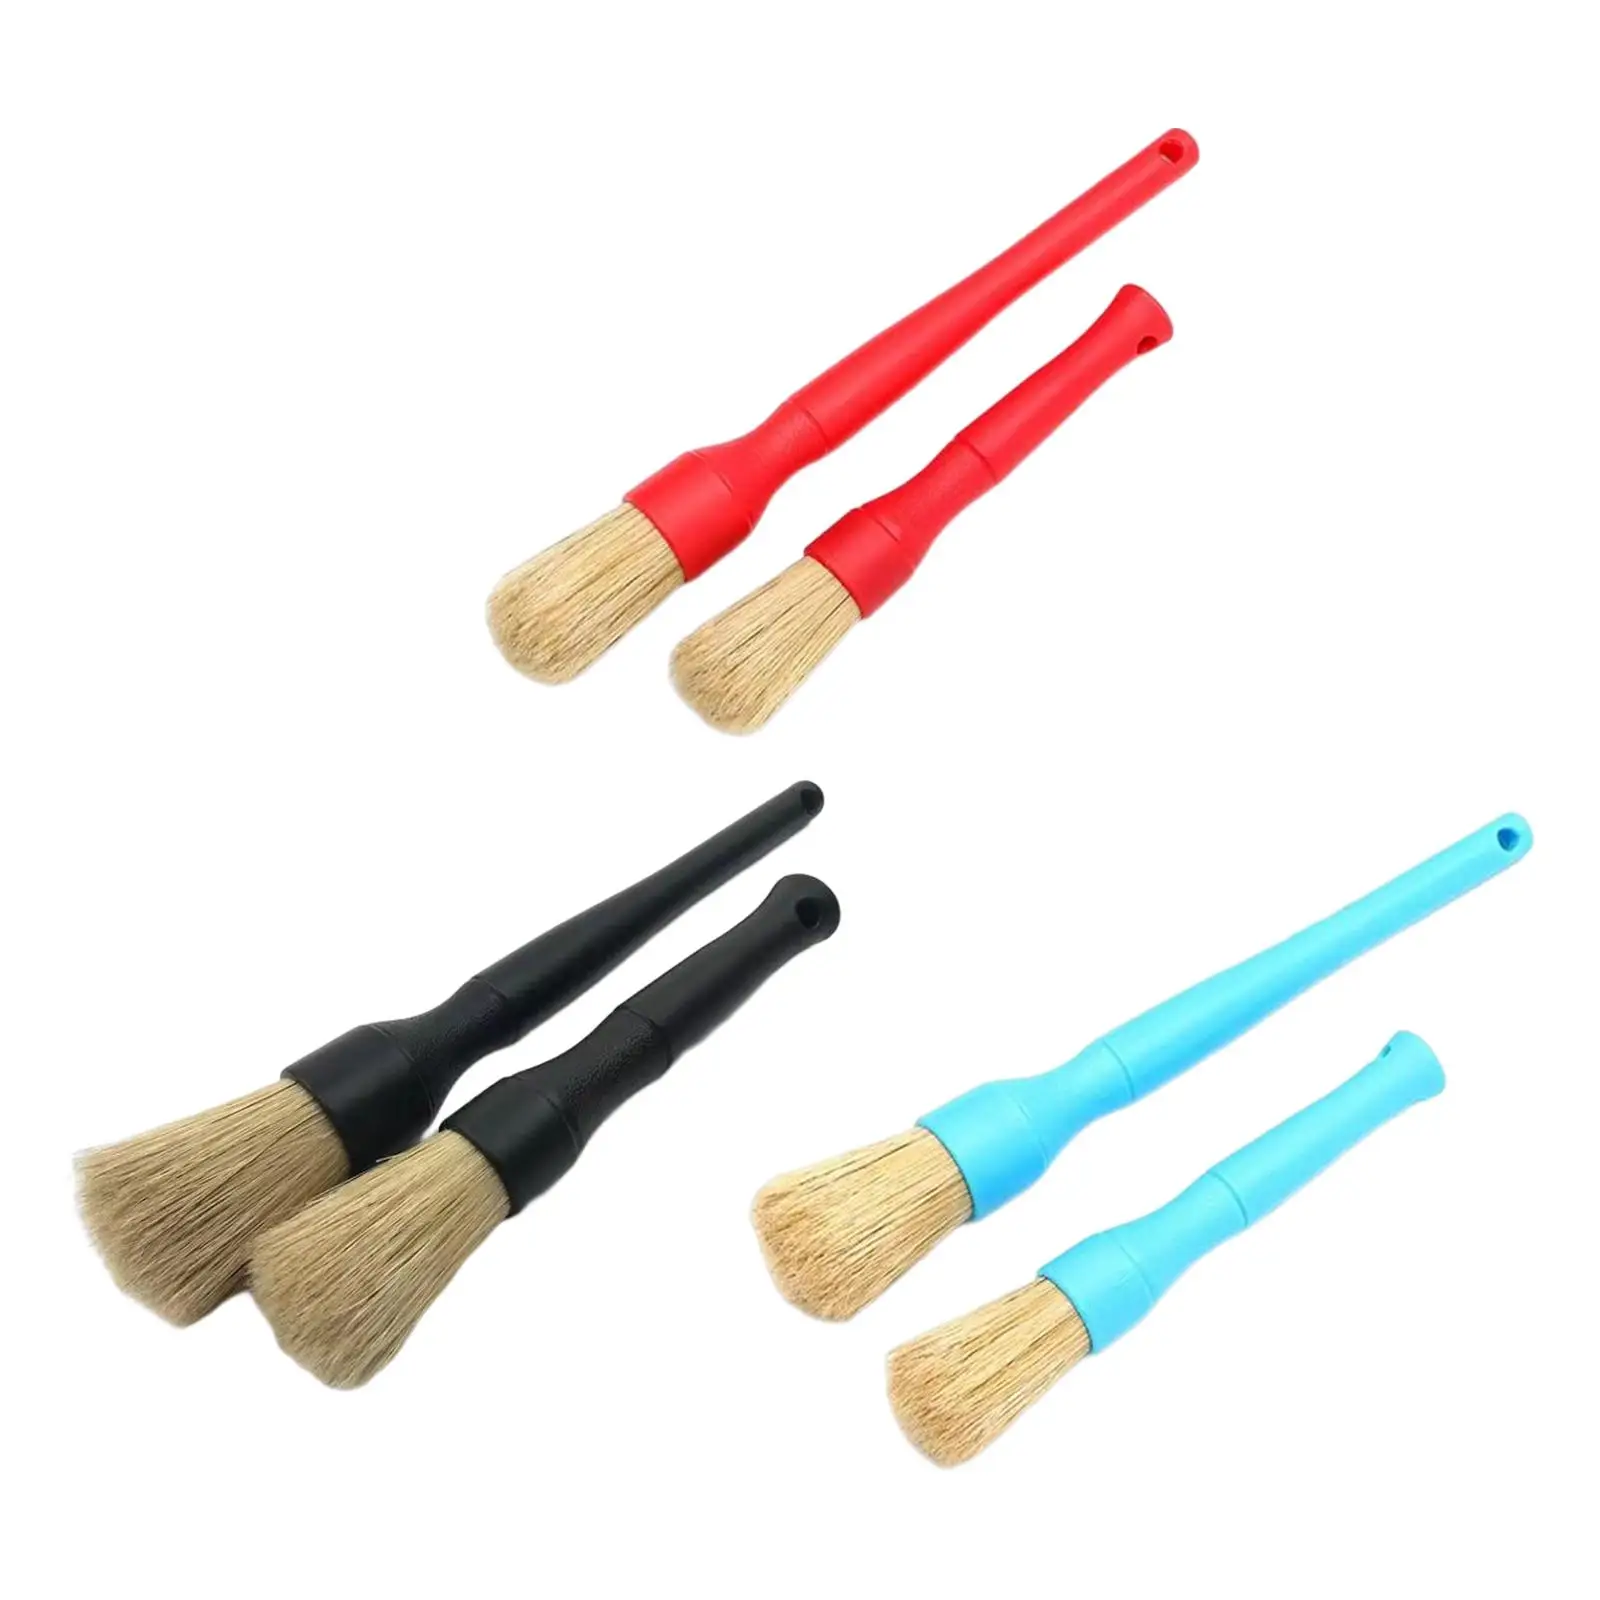 2x Car Automobile Detailing Brush with Hole Handy Tool for #Automotive